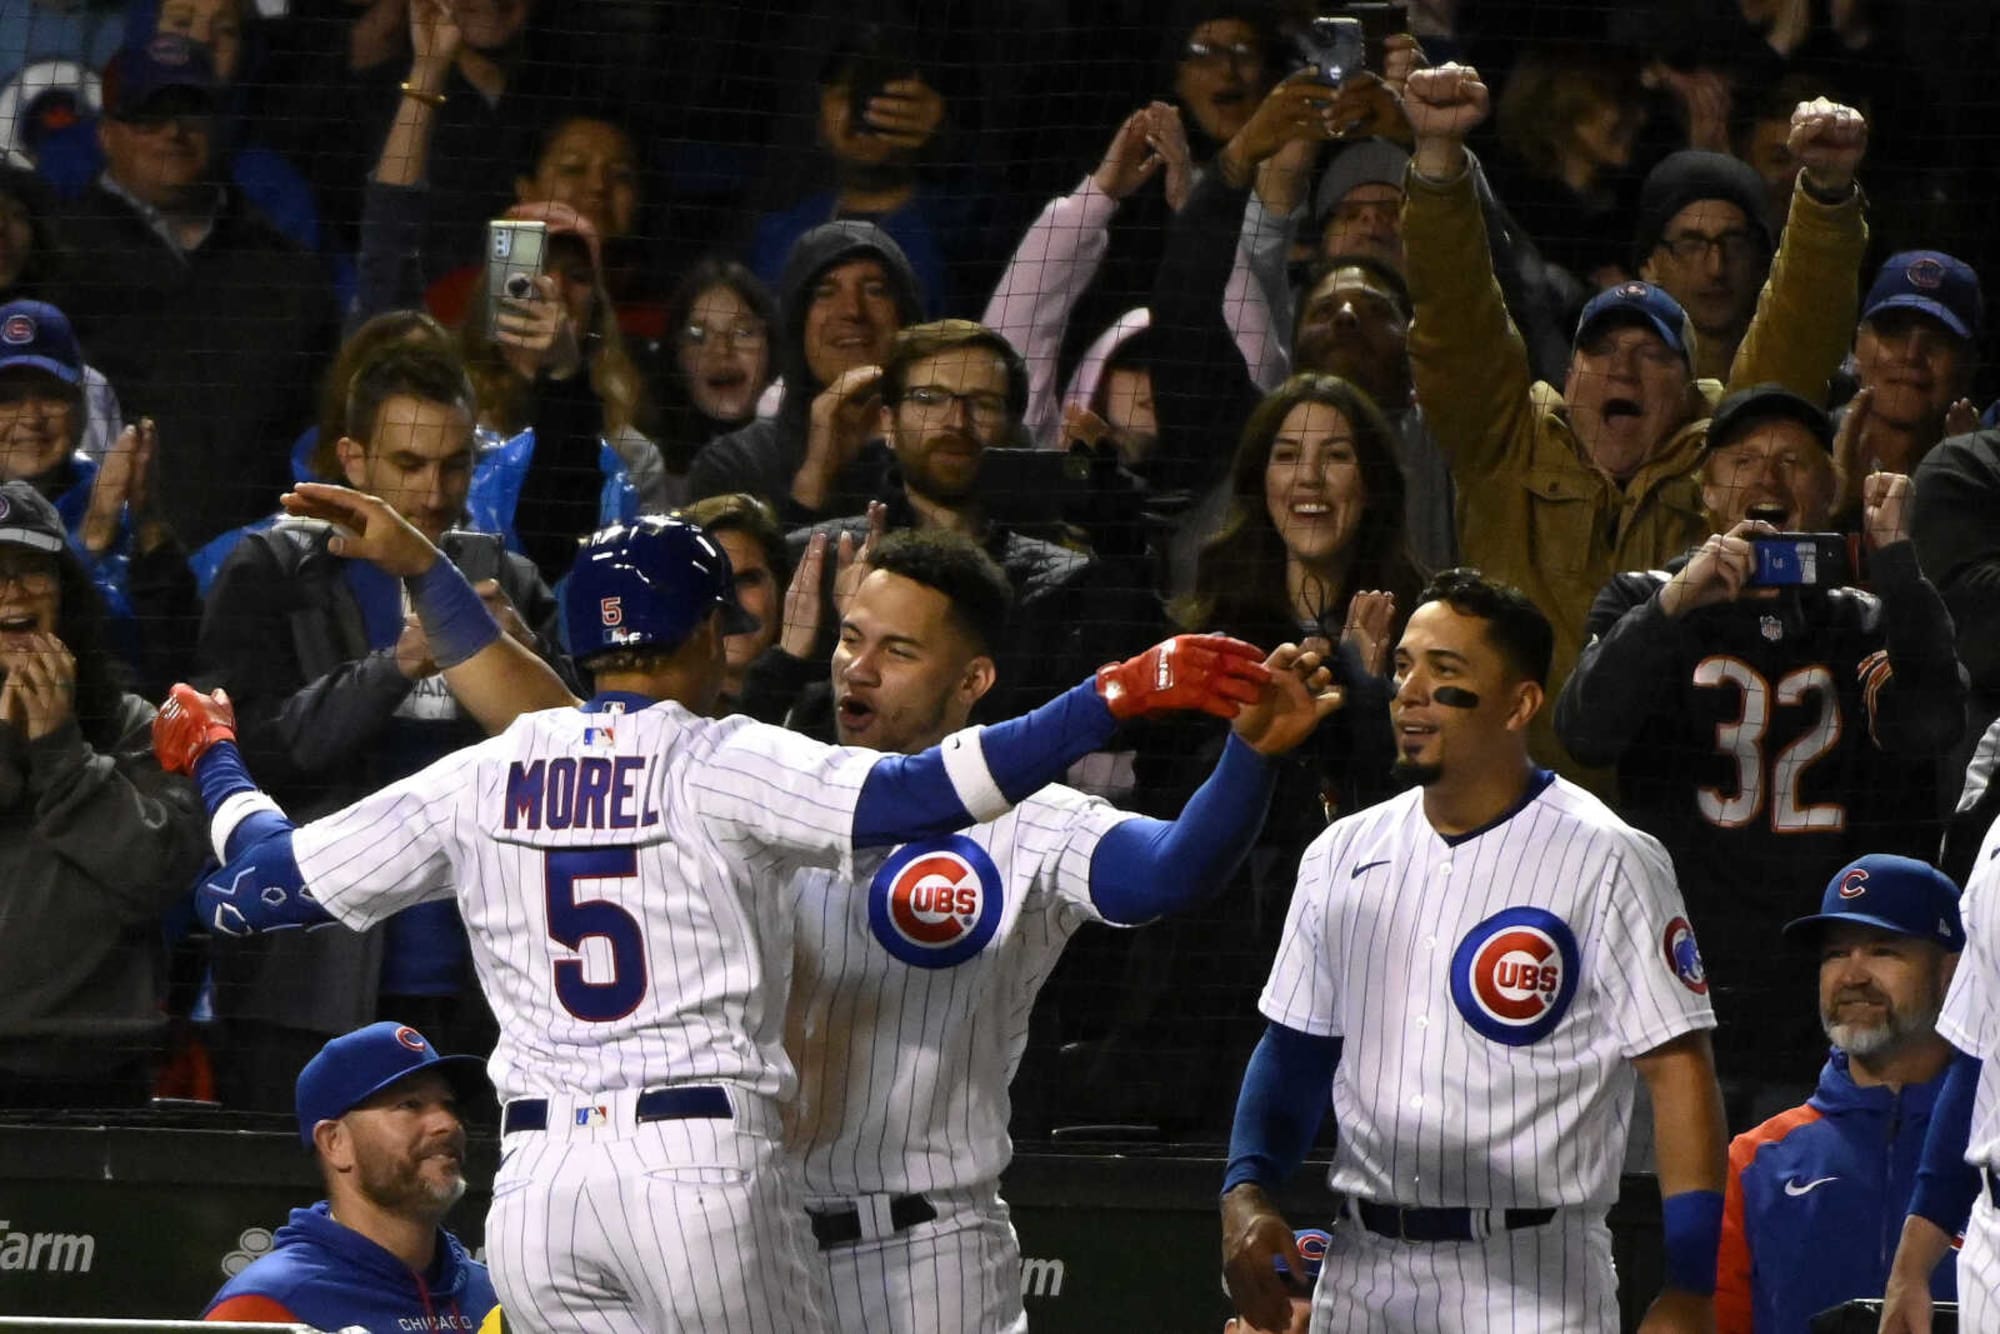 Christopher Morel helps Chicago Cubs rally for a wild 10-7 victory